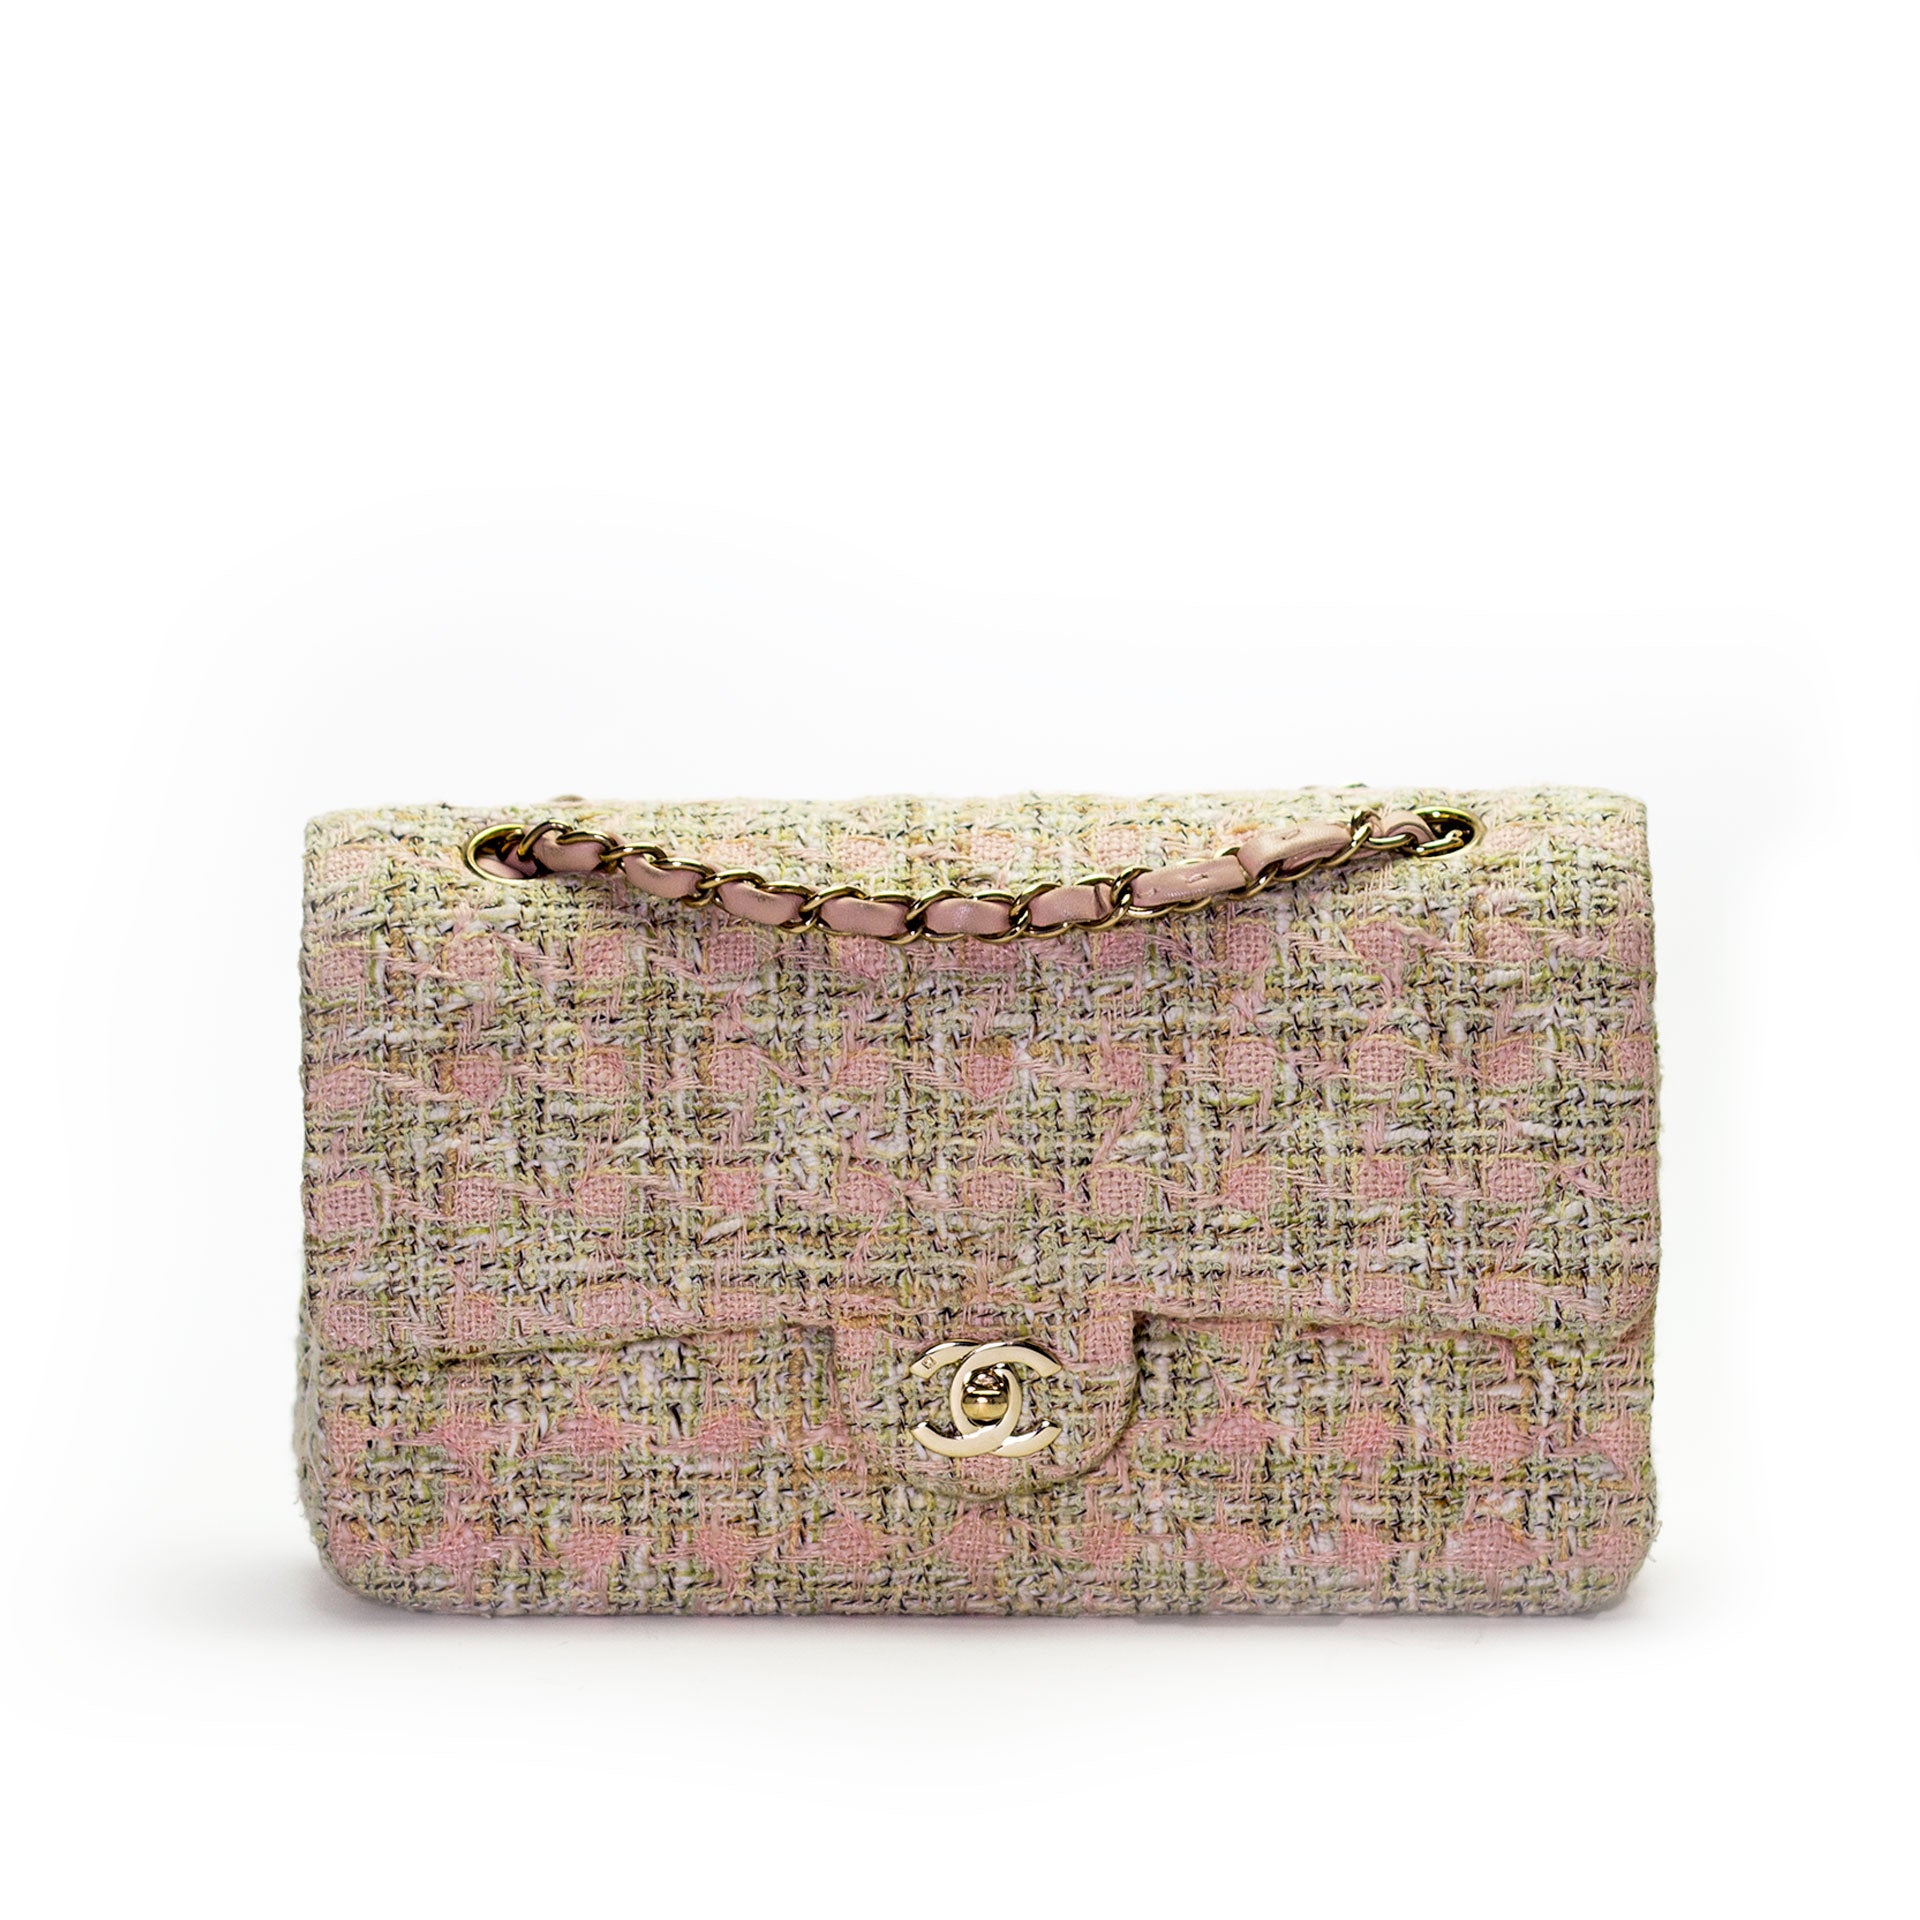 Chanel Pink and Green Tweed Classic Flap Bag